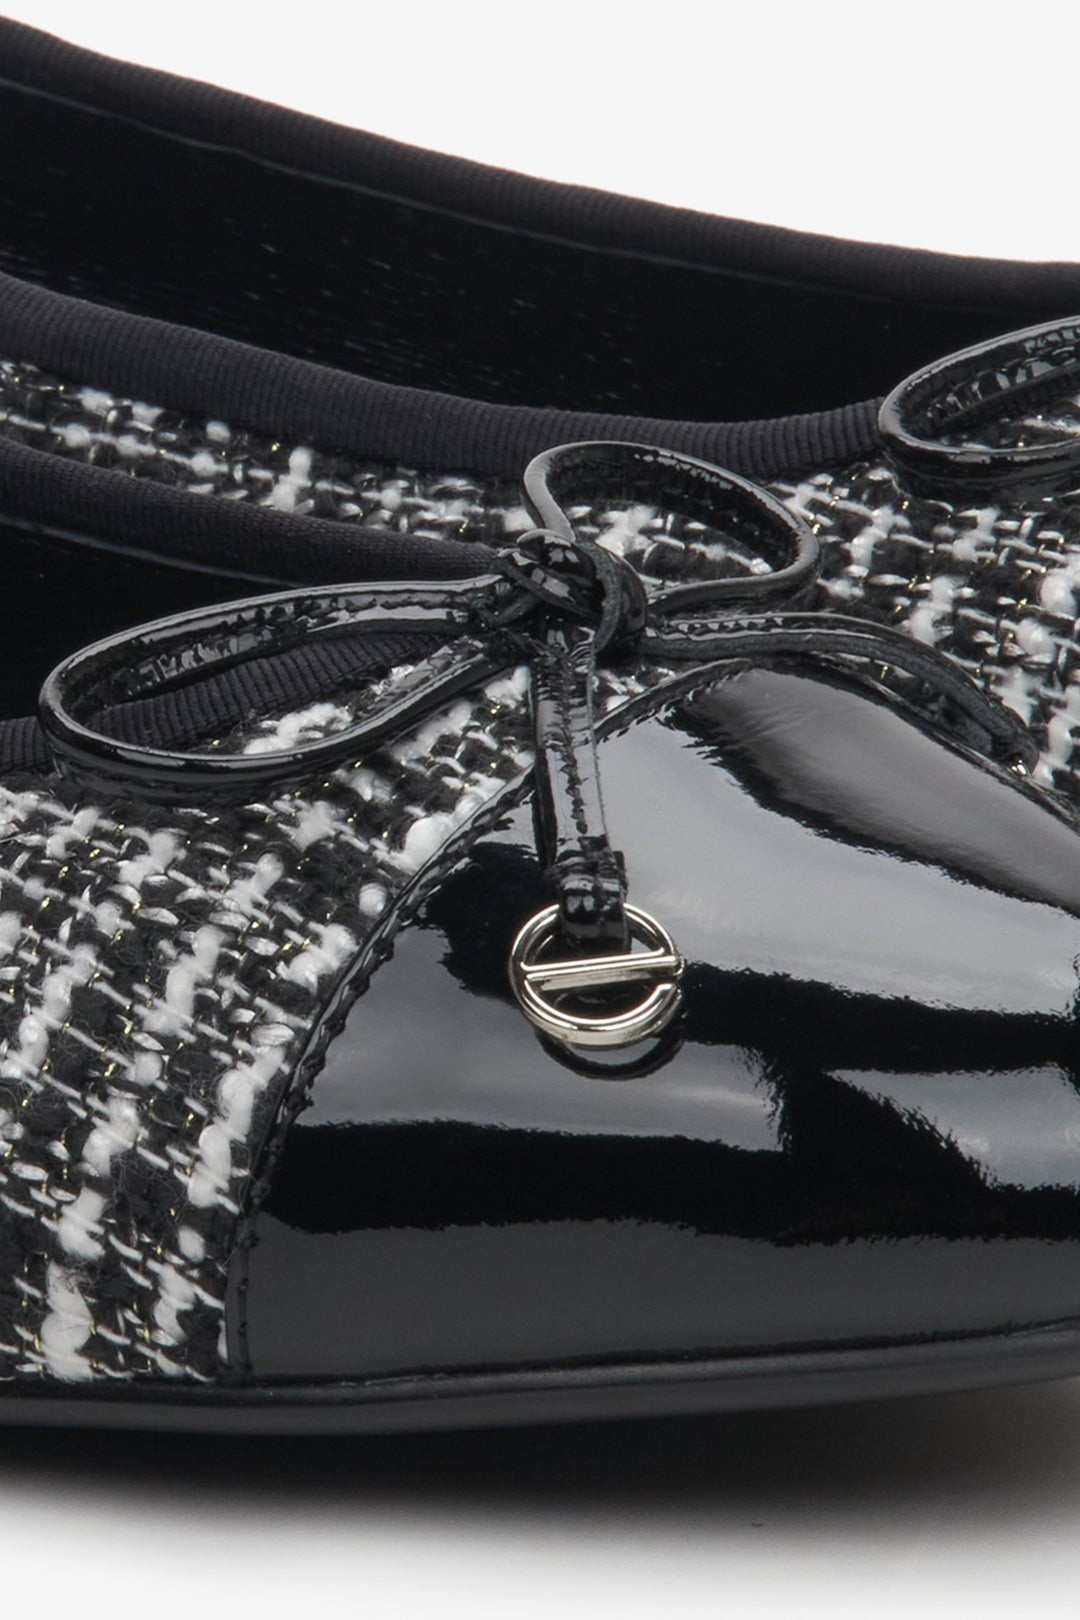 Women's black and white moccasins with a bow - close-up on the detail.